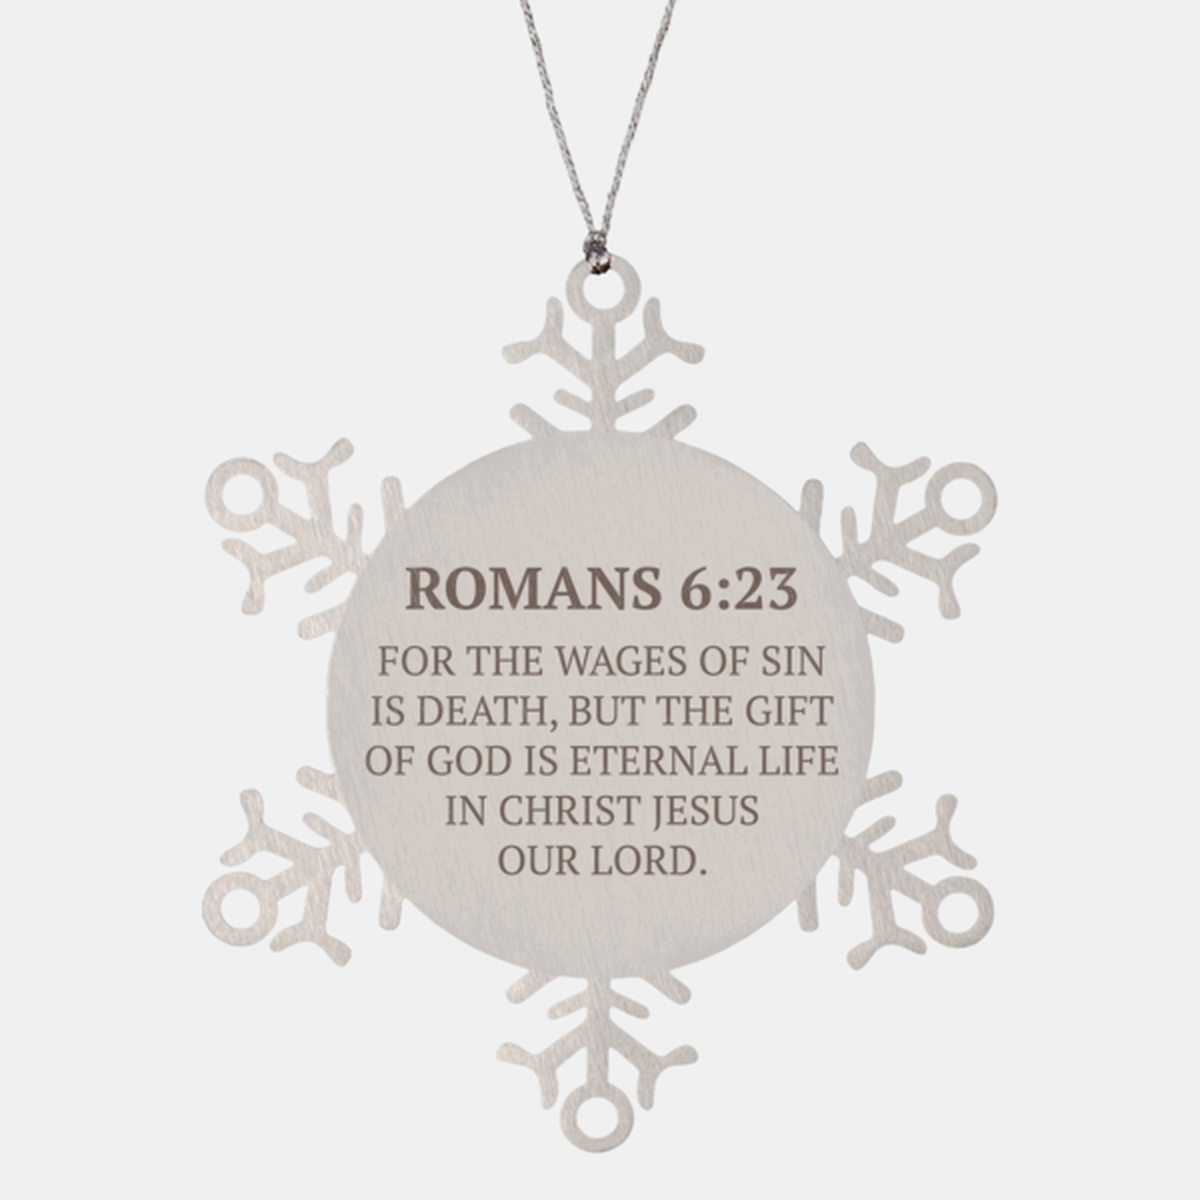 Christian Ornaments For Christmas Tree, For The Wages Of Sin Is Death, But The Gift, Religious Christmas Decorations, Scripture Ornaments Gifts, Bible Verse Ornament